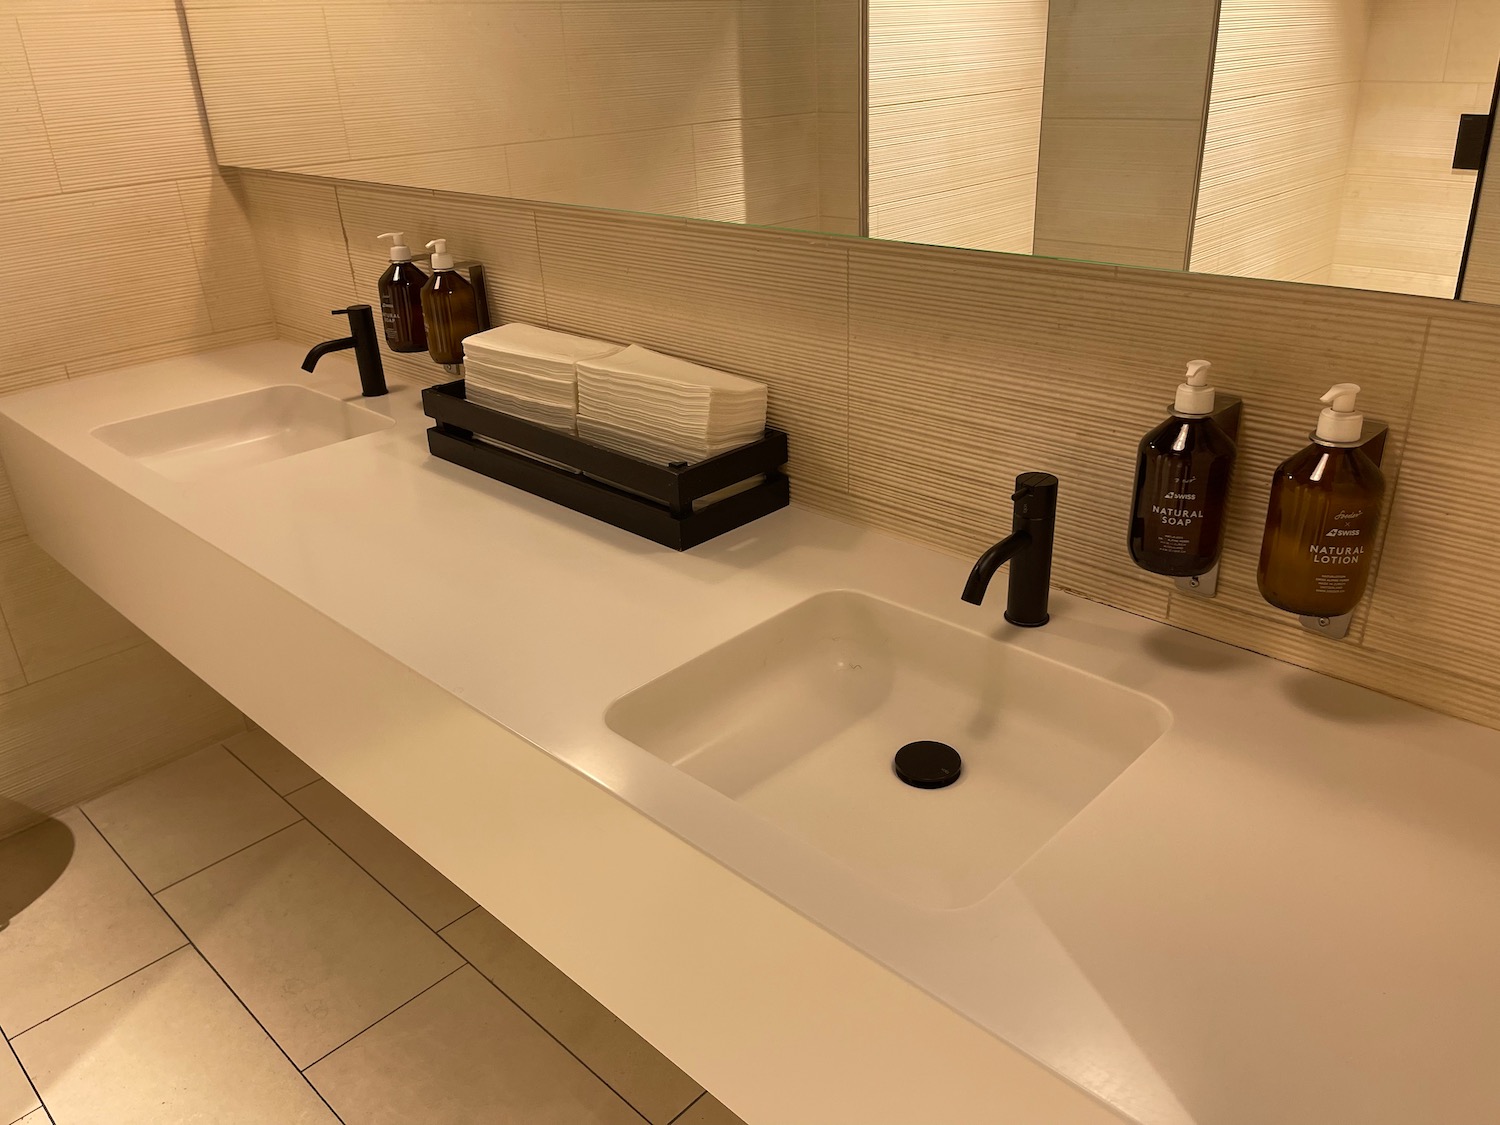 a bathroom sink with soap dispensers and soap bottles